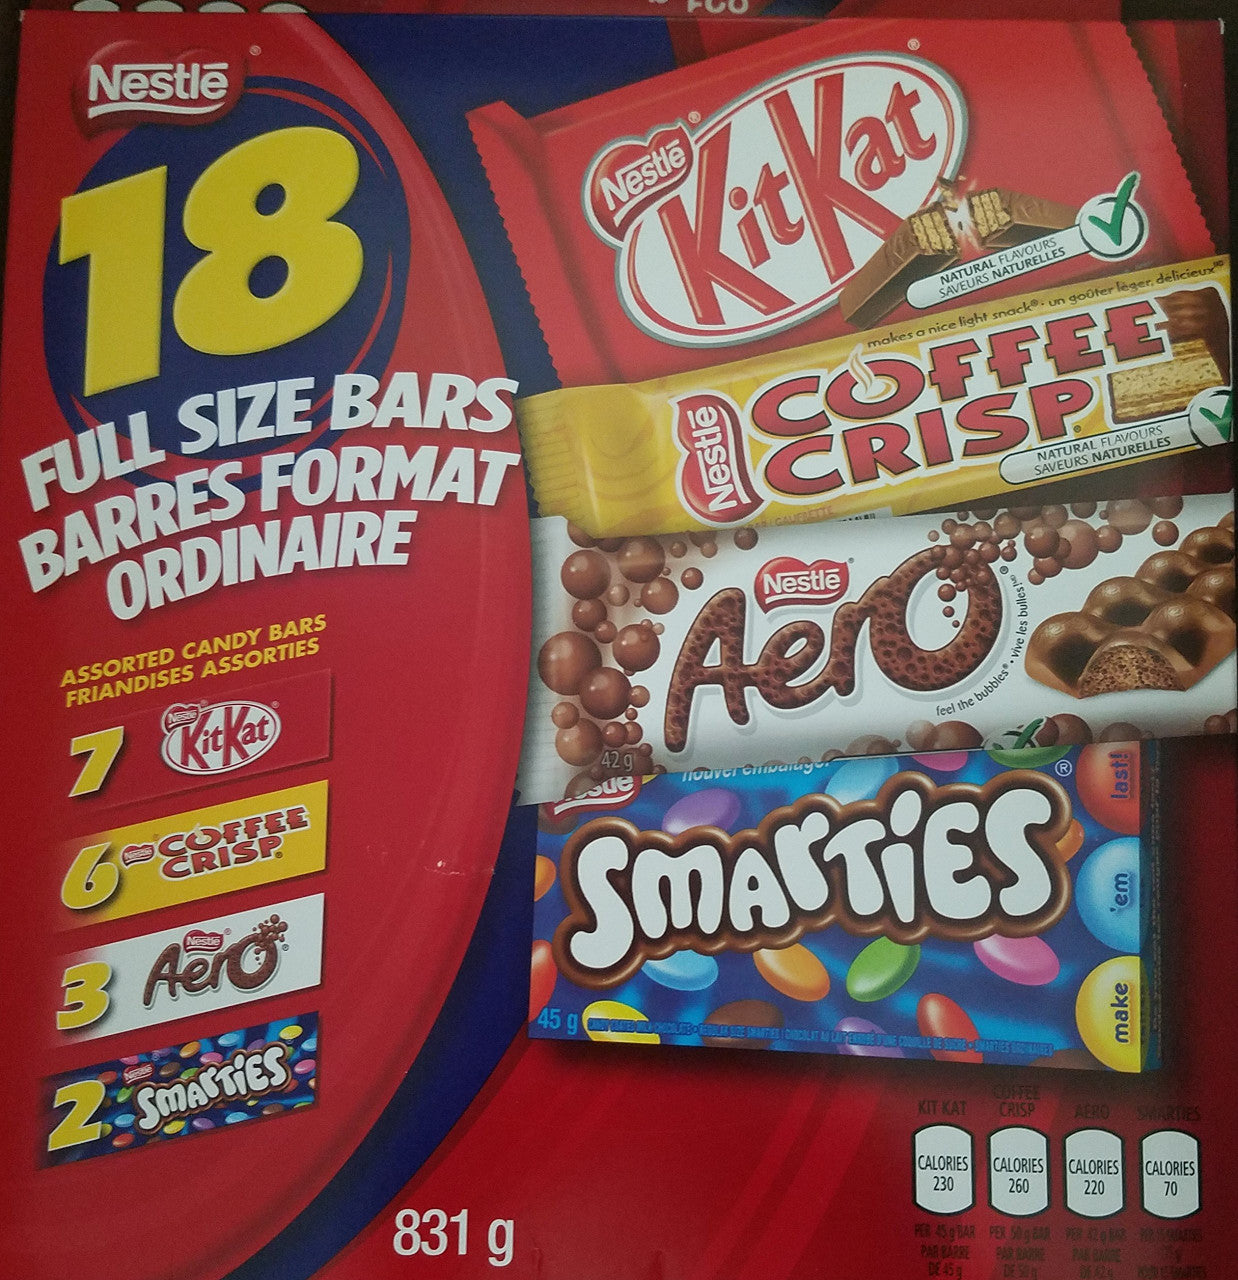 Nestlé Assorted Bars, Pack of 18, Coffee Crisp AERO Smarties KitKat {Imported from Canada}